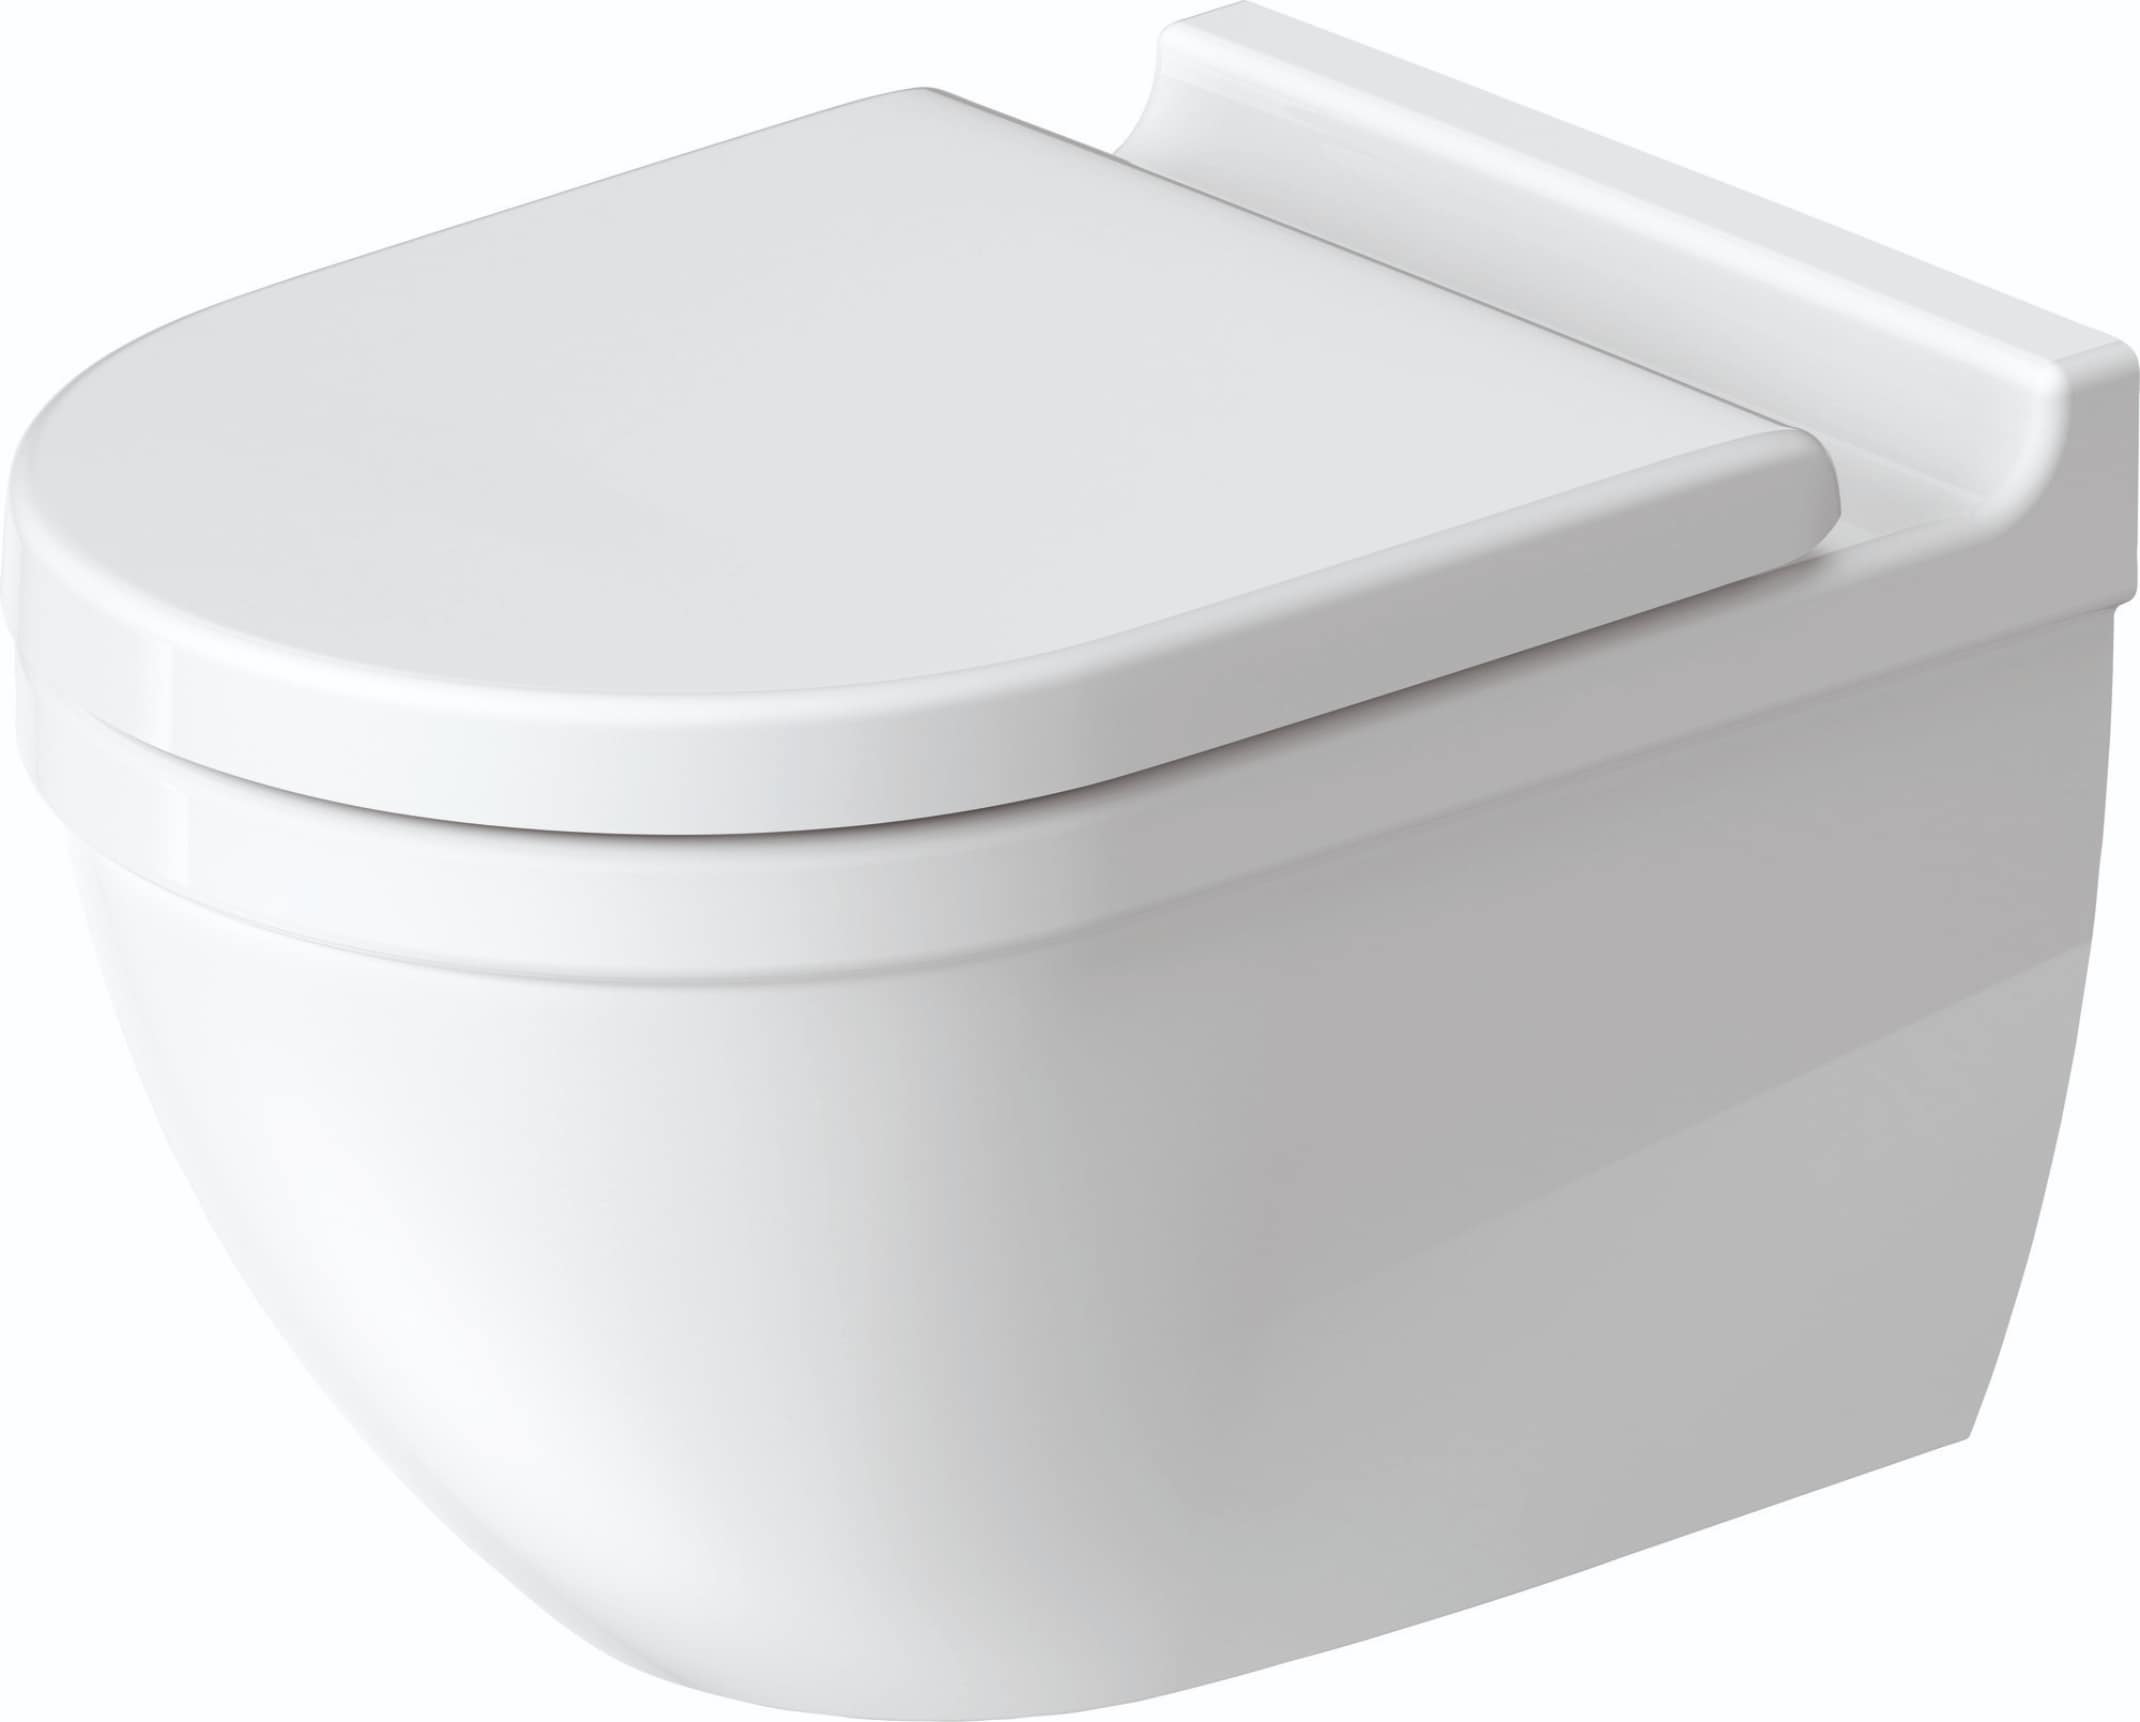 Duravit 3 White Elongated Standard Toilet Bowl in the Toilet Bowls department at Lowes.com